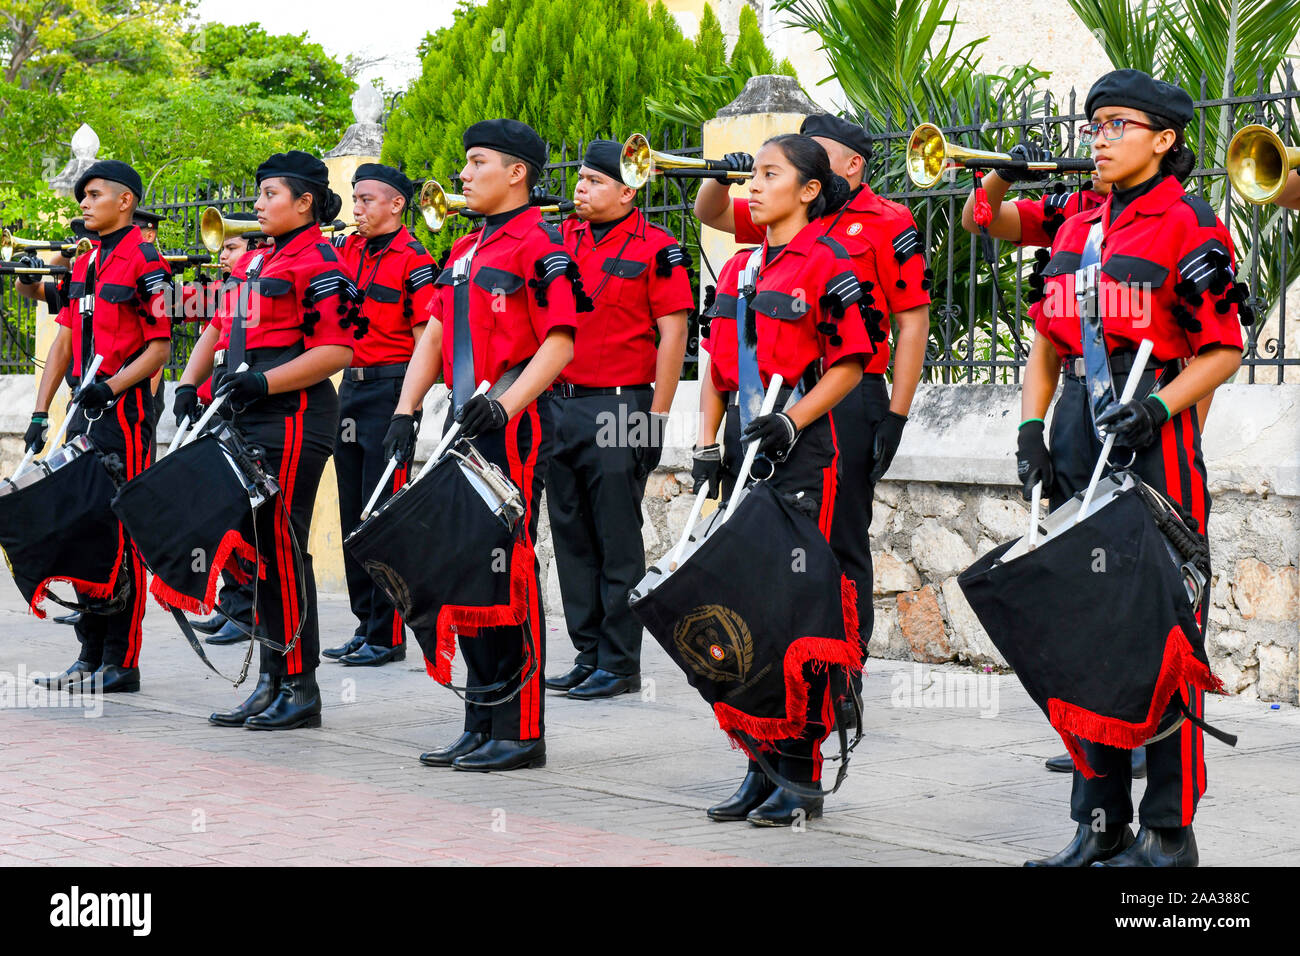 Marching band playing drums on Revolution Day, Merida Stock Photo